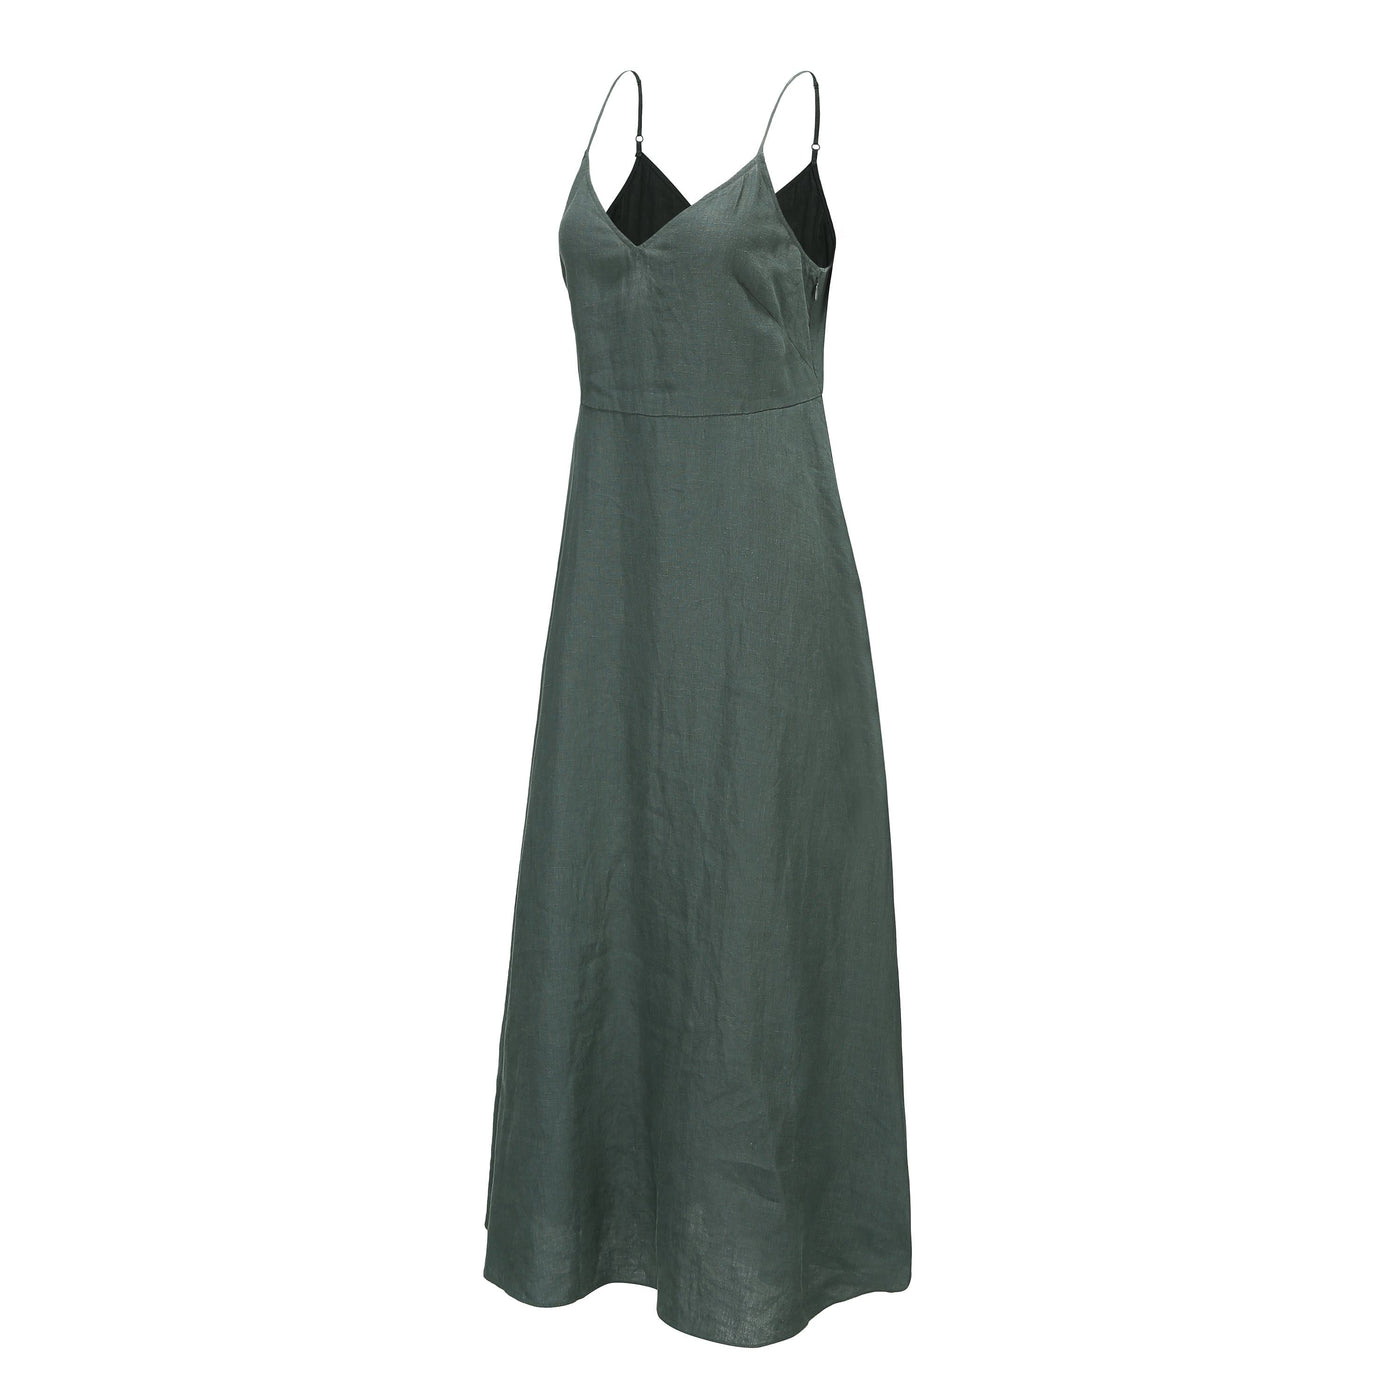 Lilly Pilly Collection 100% organic linen Zoe Dress in Bottle Green as 3D image showing side view